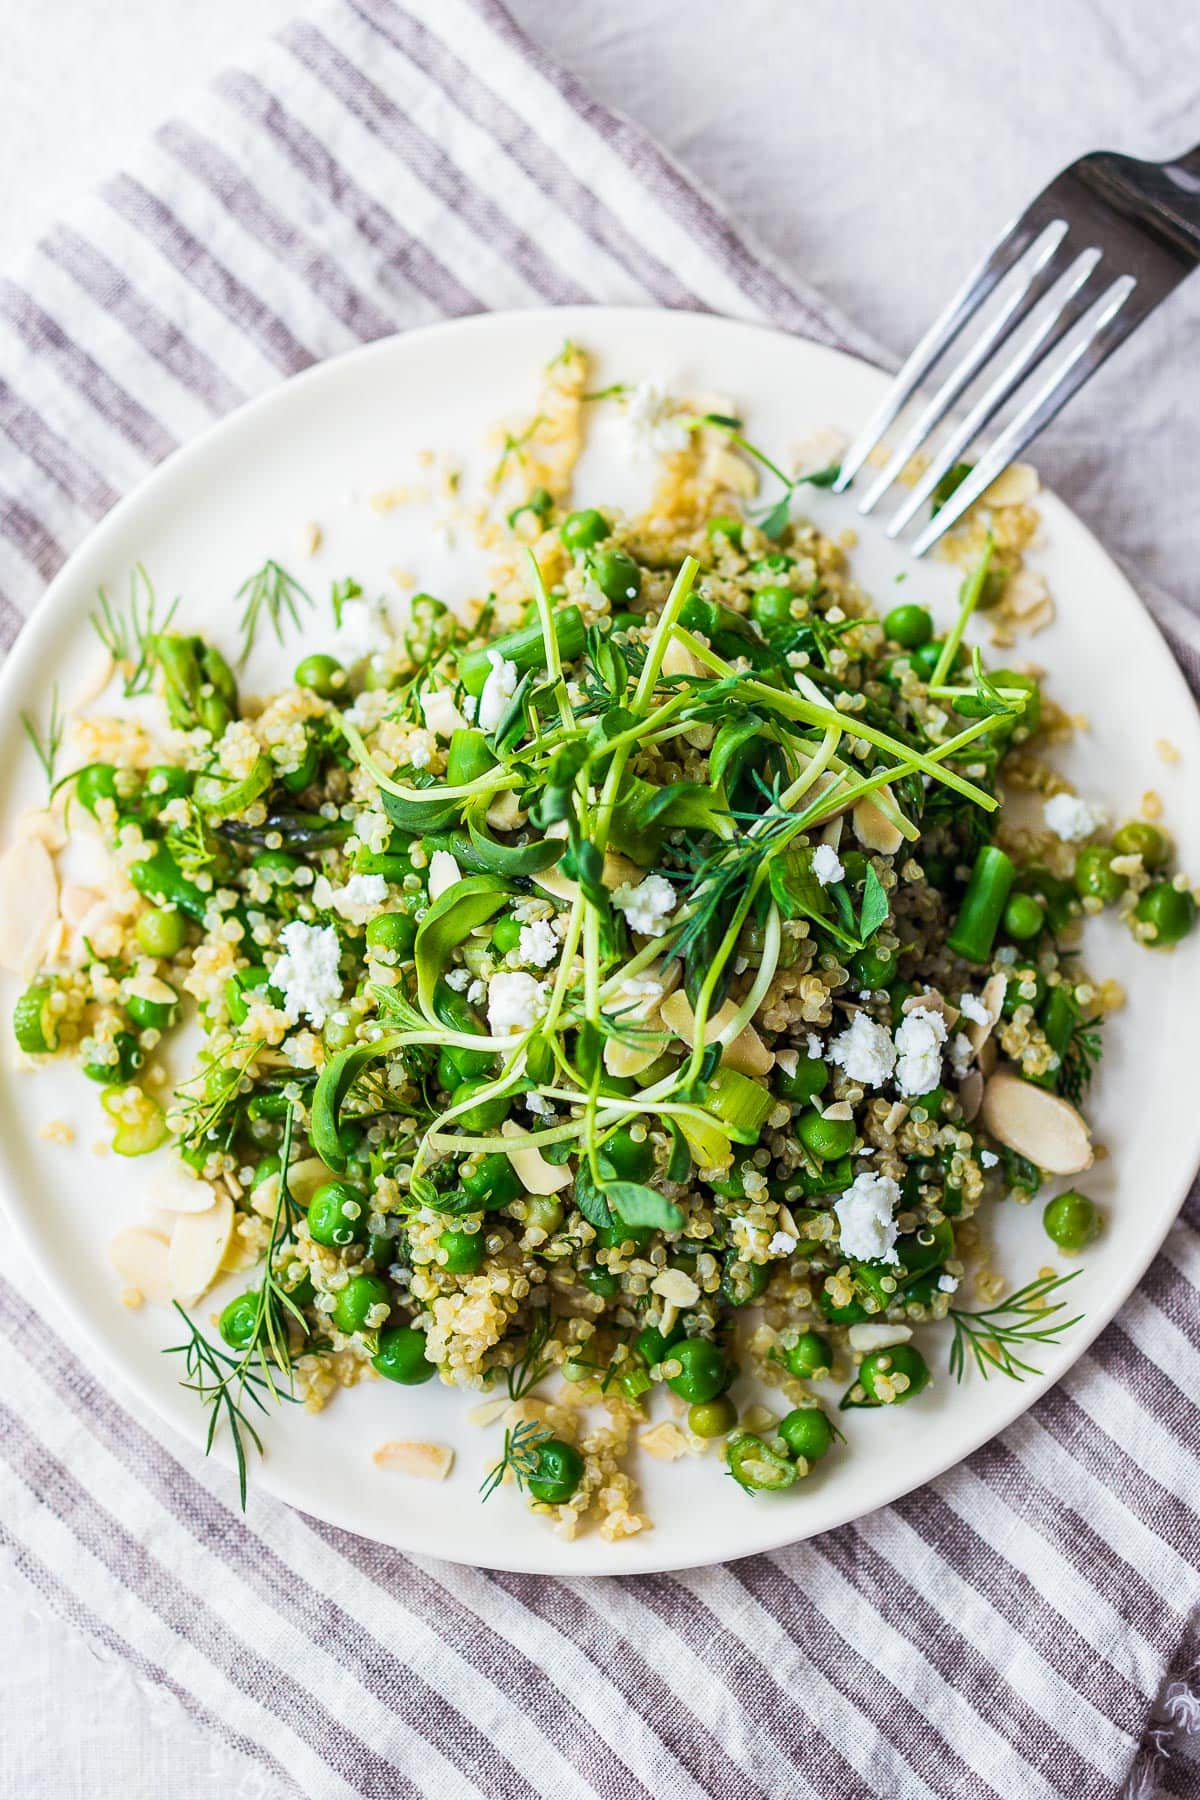 A simple recipe for Quinoa Asparagus Salad (aka Spring Tabouli) tossed with English peas, fresh dill, parsley, toasted almonds in a lemony dressing topped with optional avocado, goat or feta cheese. A healthy, flavorful salad that can be made ahead- perfect for special gatherings or midweek lunches! GF &  Vegan adaptable! 